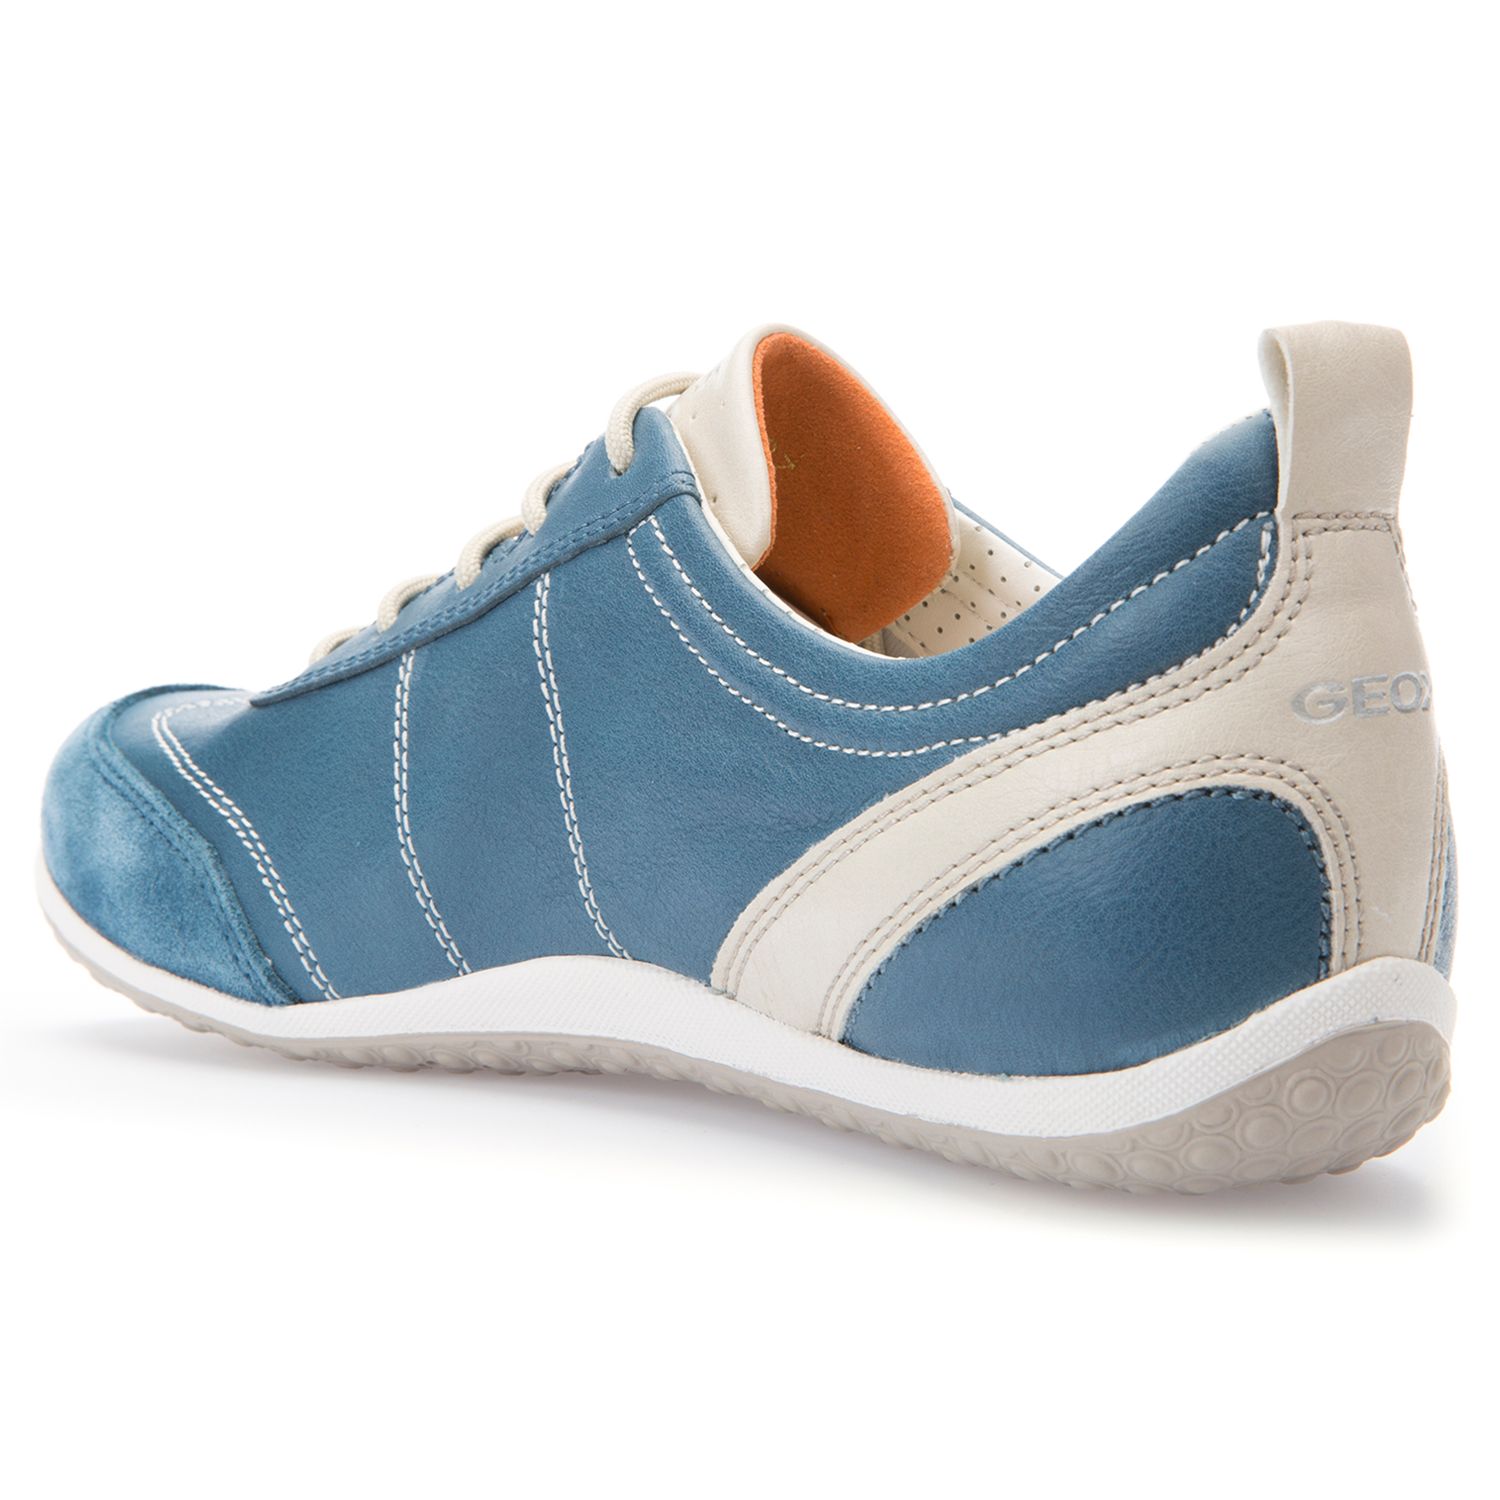 Buy Geox Vega Leather Lace Up Trainers | John Lewis